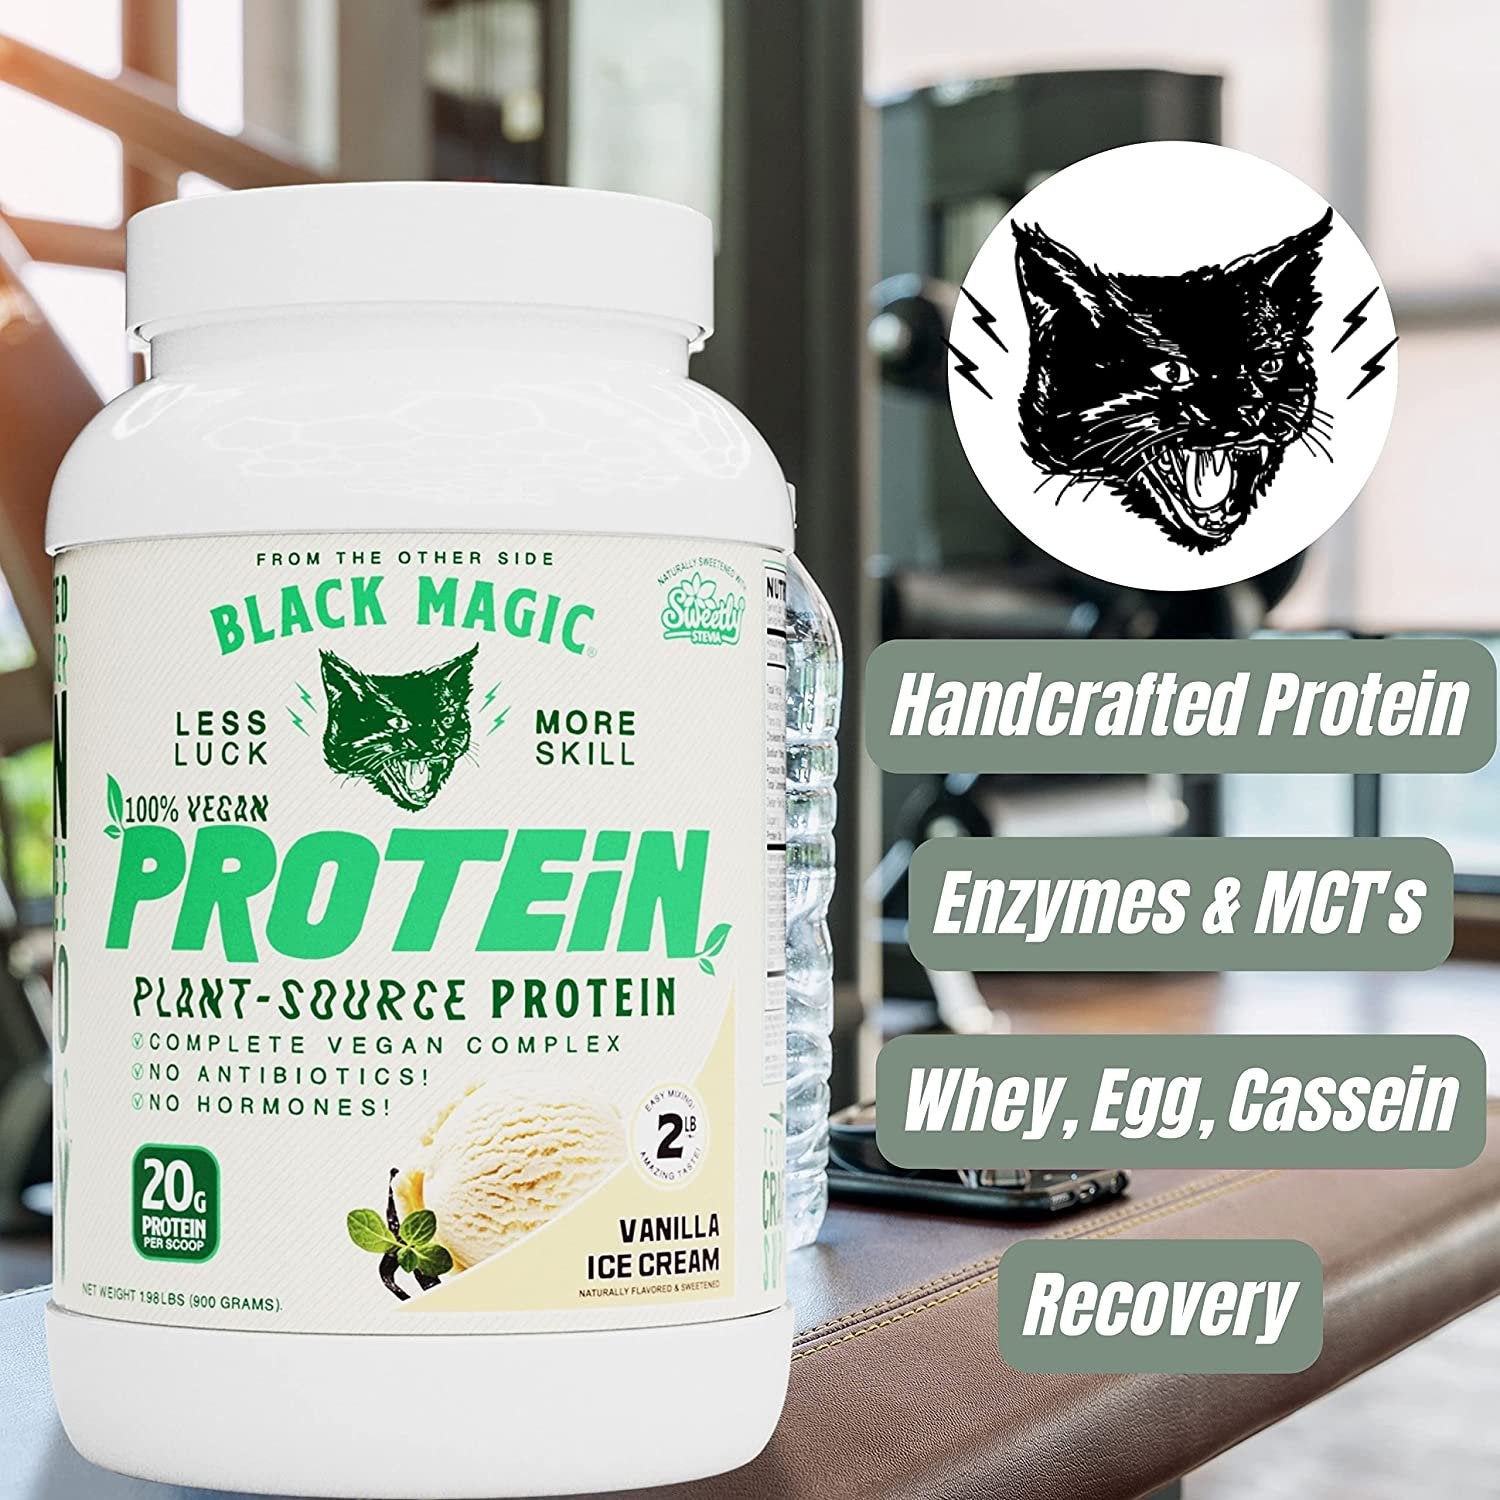 Vanilla Ice Cream Black Magic Multi-Source Protein - Whey, Egg, and Casein Complex with Enzymes & MCT Powder - Pre Workout and Post Workout - 24g Protein - 2 LB with Bonus Key Chain